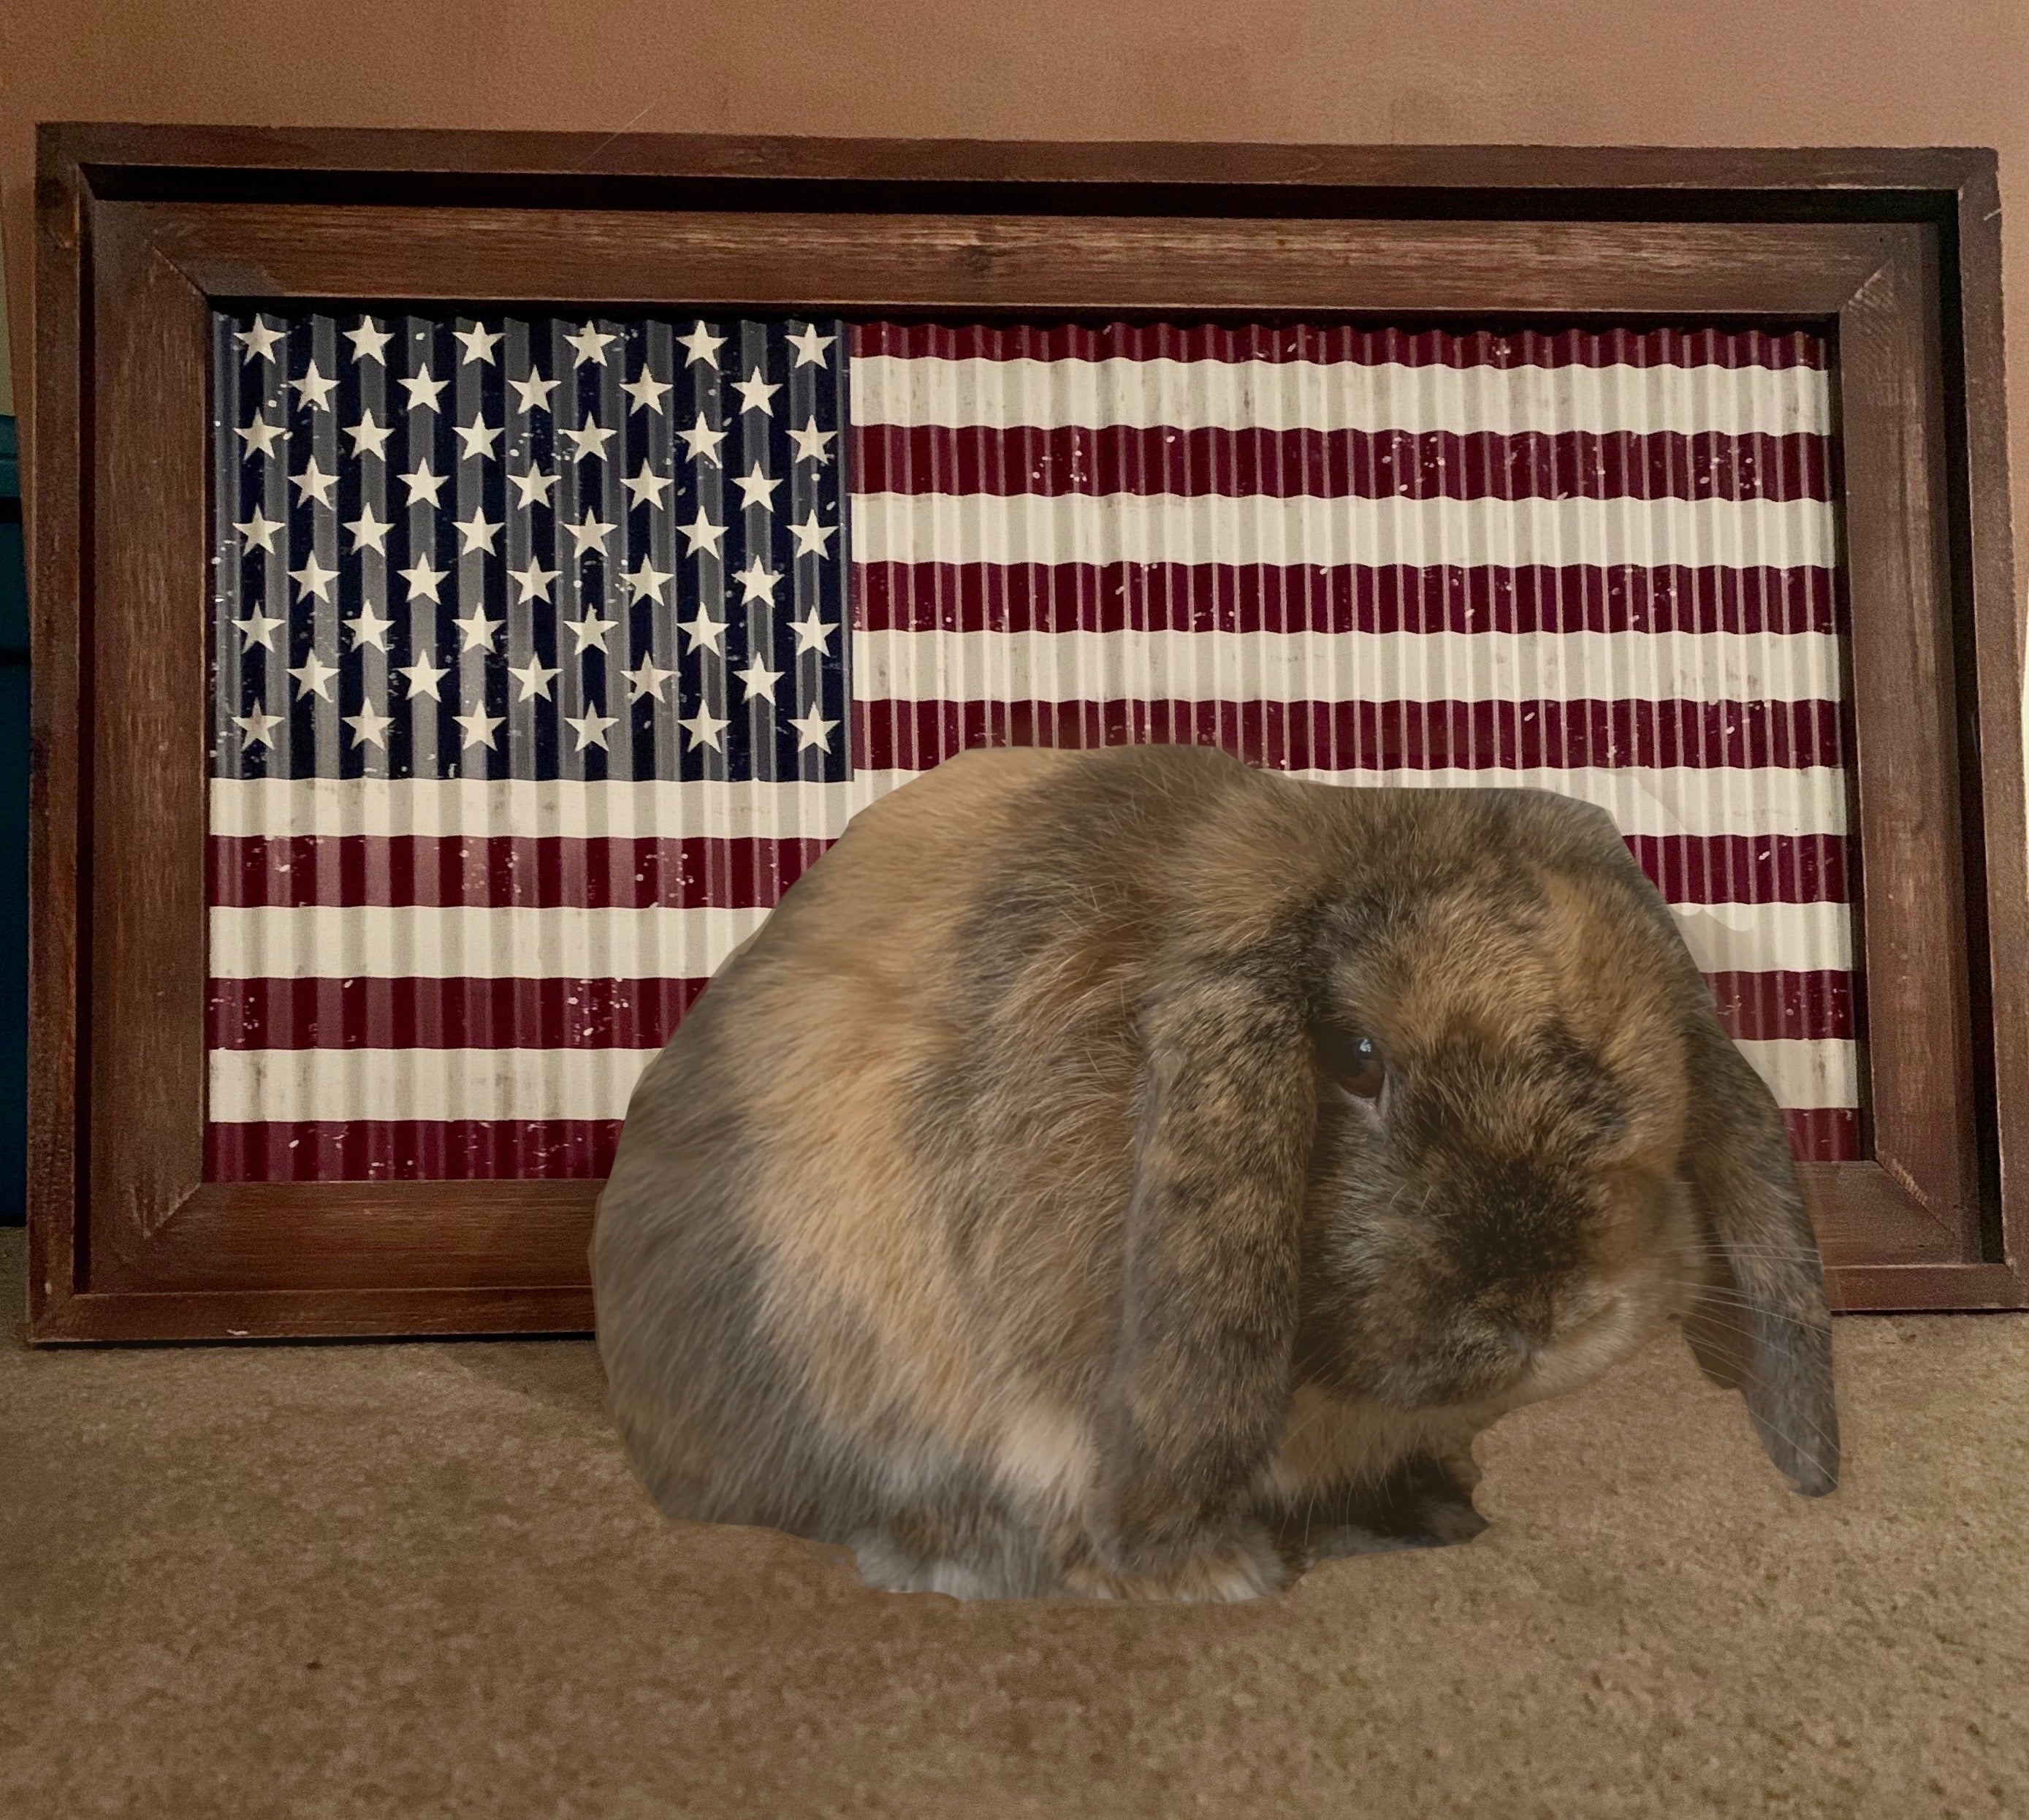 Moose the "Hint" Bunny